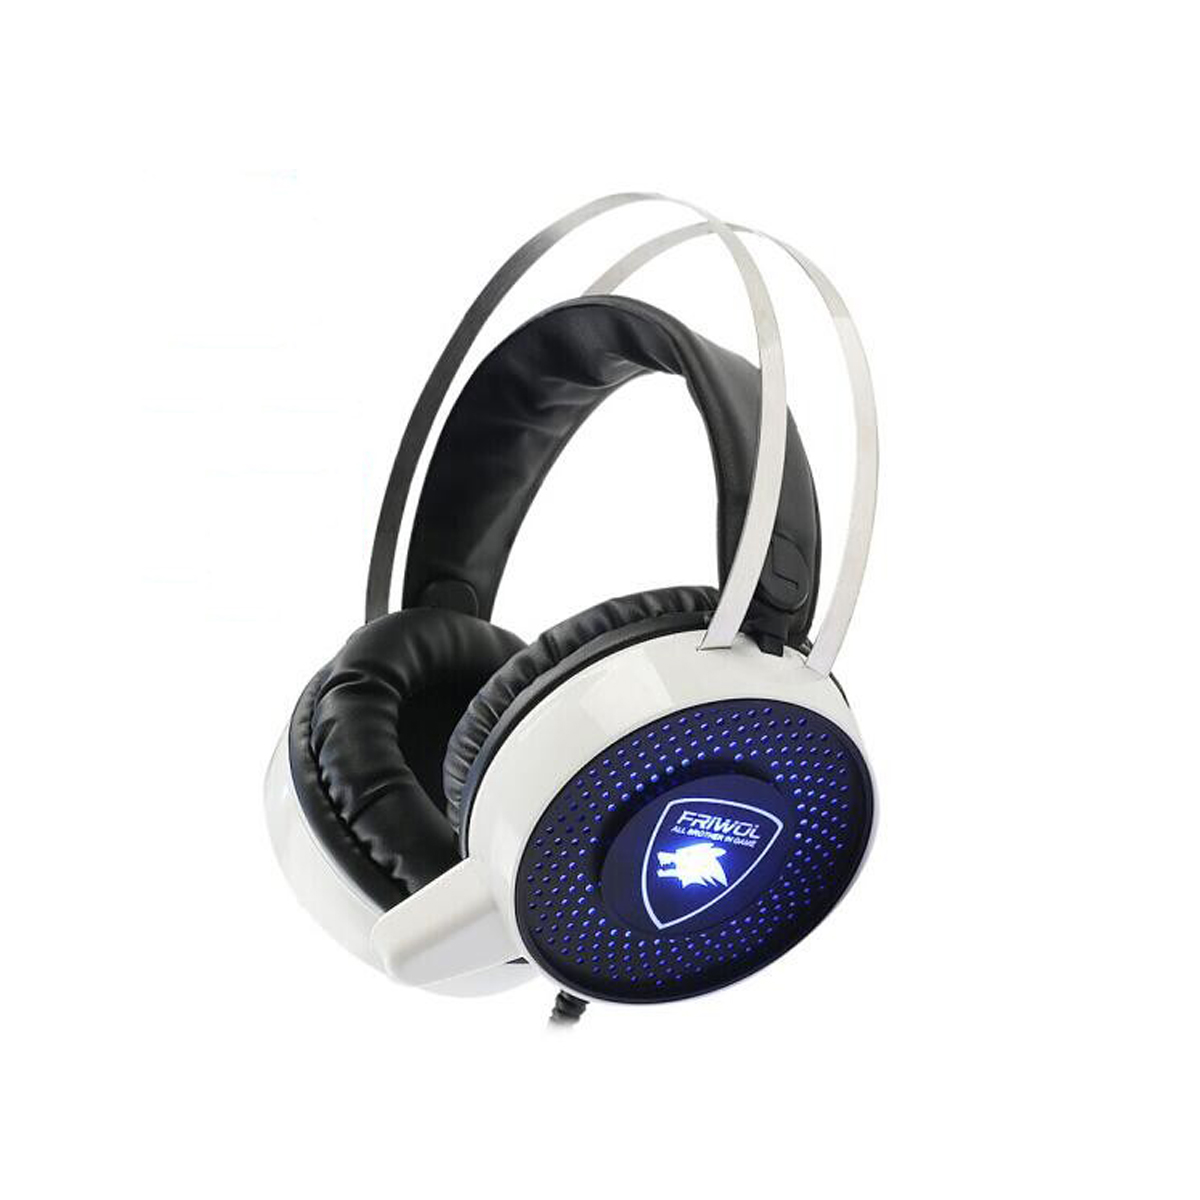 

G9000 7 Colors Light Gaming Headphone with Light Mic Stereo Earphones Deep Bass for PC Gamer Laptop PS4 New X-BOX